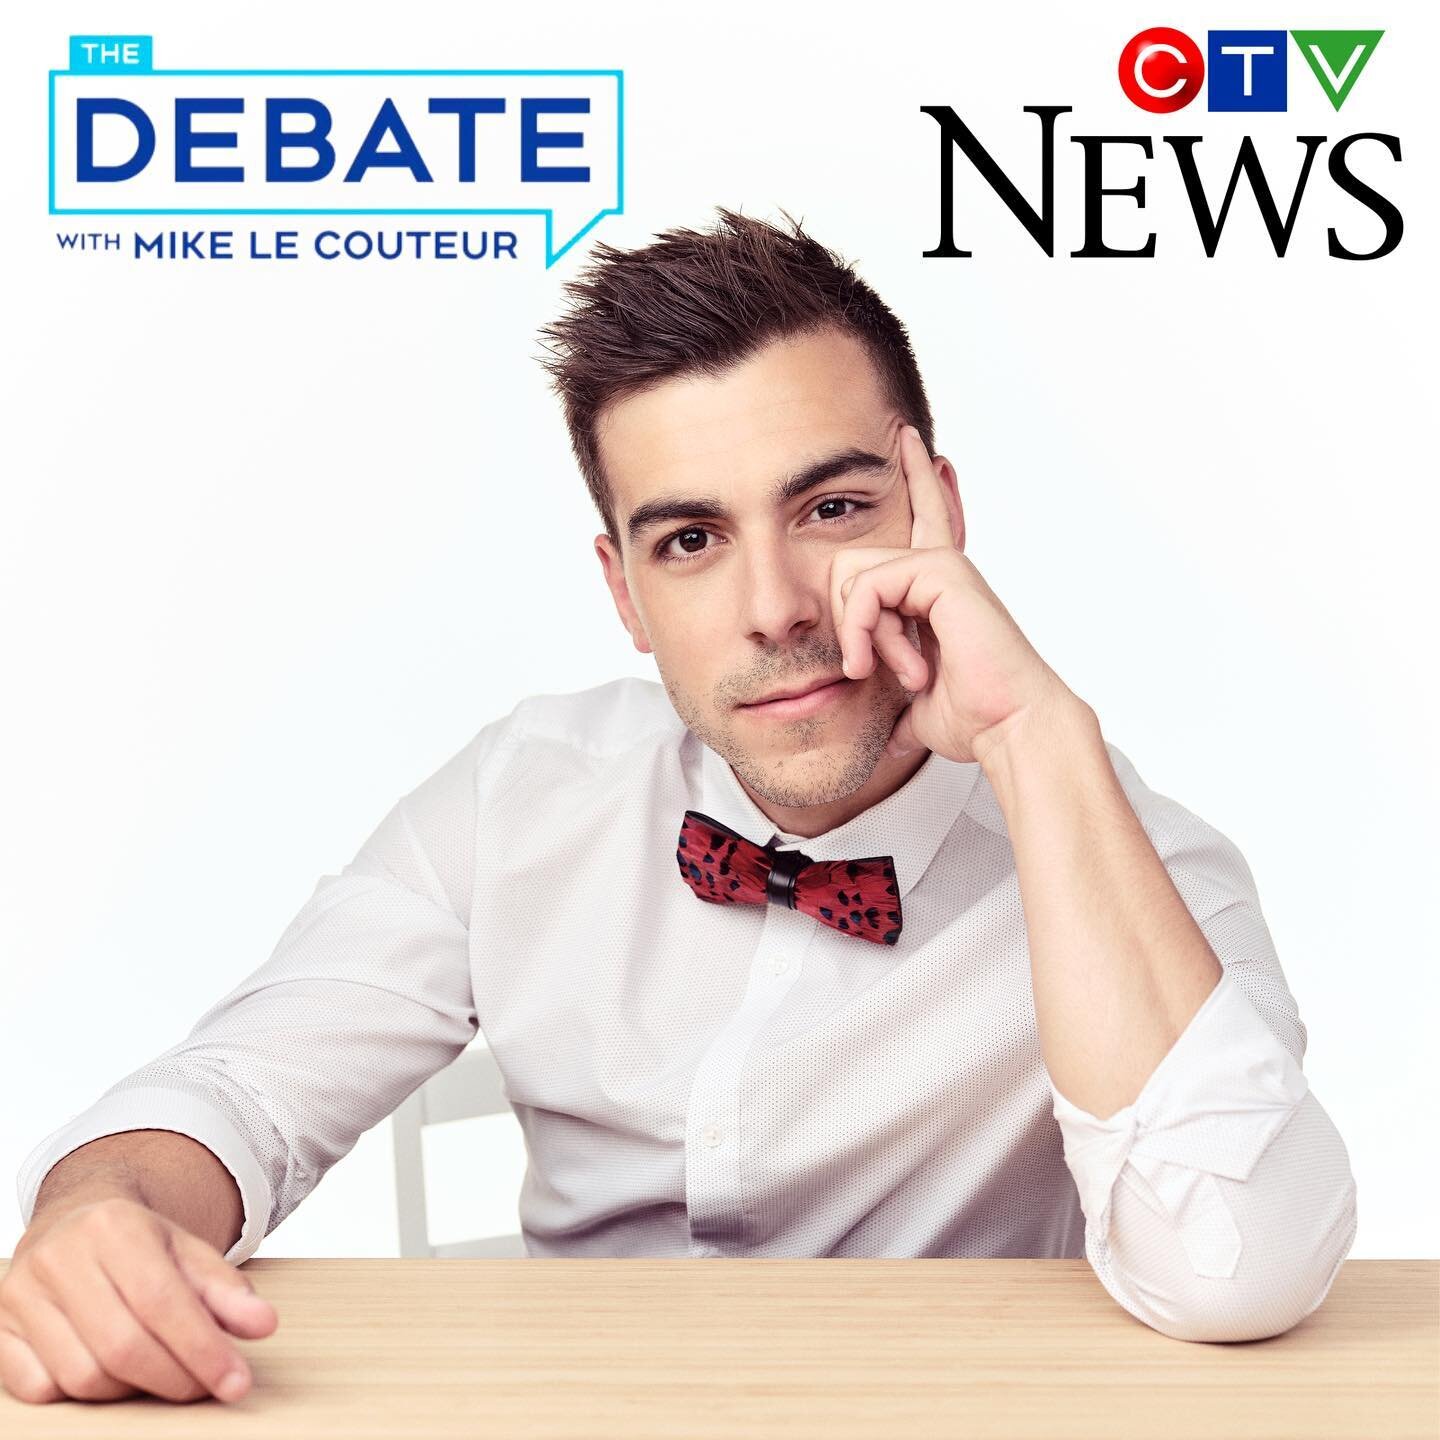 Tonight I will be appearing on the NEW show @ctvnews with @mikelecouteur The show will air live from 6PM-7PM ET on @ctvnews ! We'll be debating the top three most talked about stories of the day.

#ctvnews #ctv #mikelecouteur #debate #debates #newsup